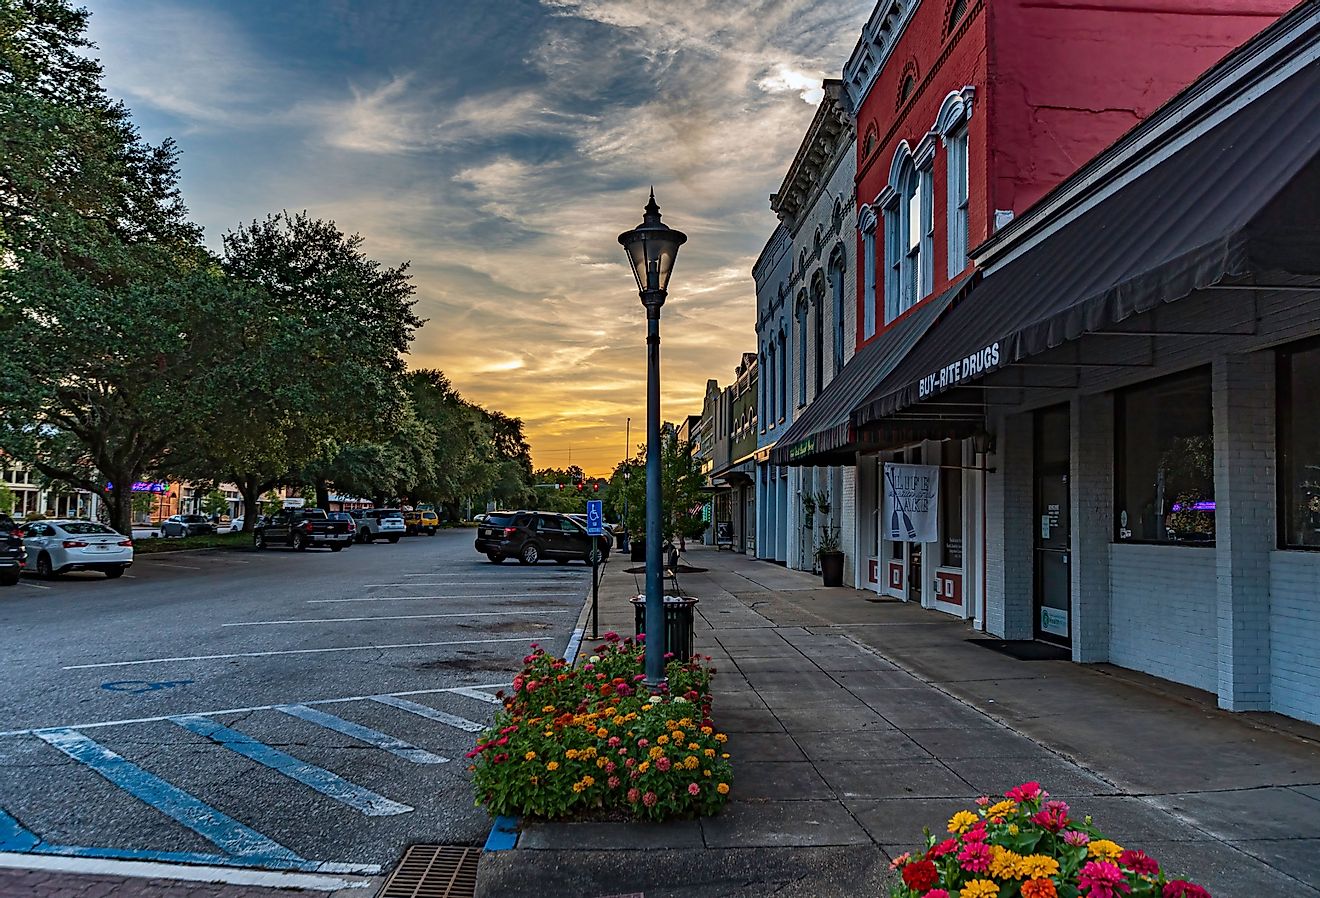 Scenic view of historic downtown Eufaula at sunset. Image credit JNix via Shutterstock